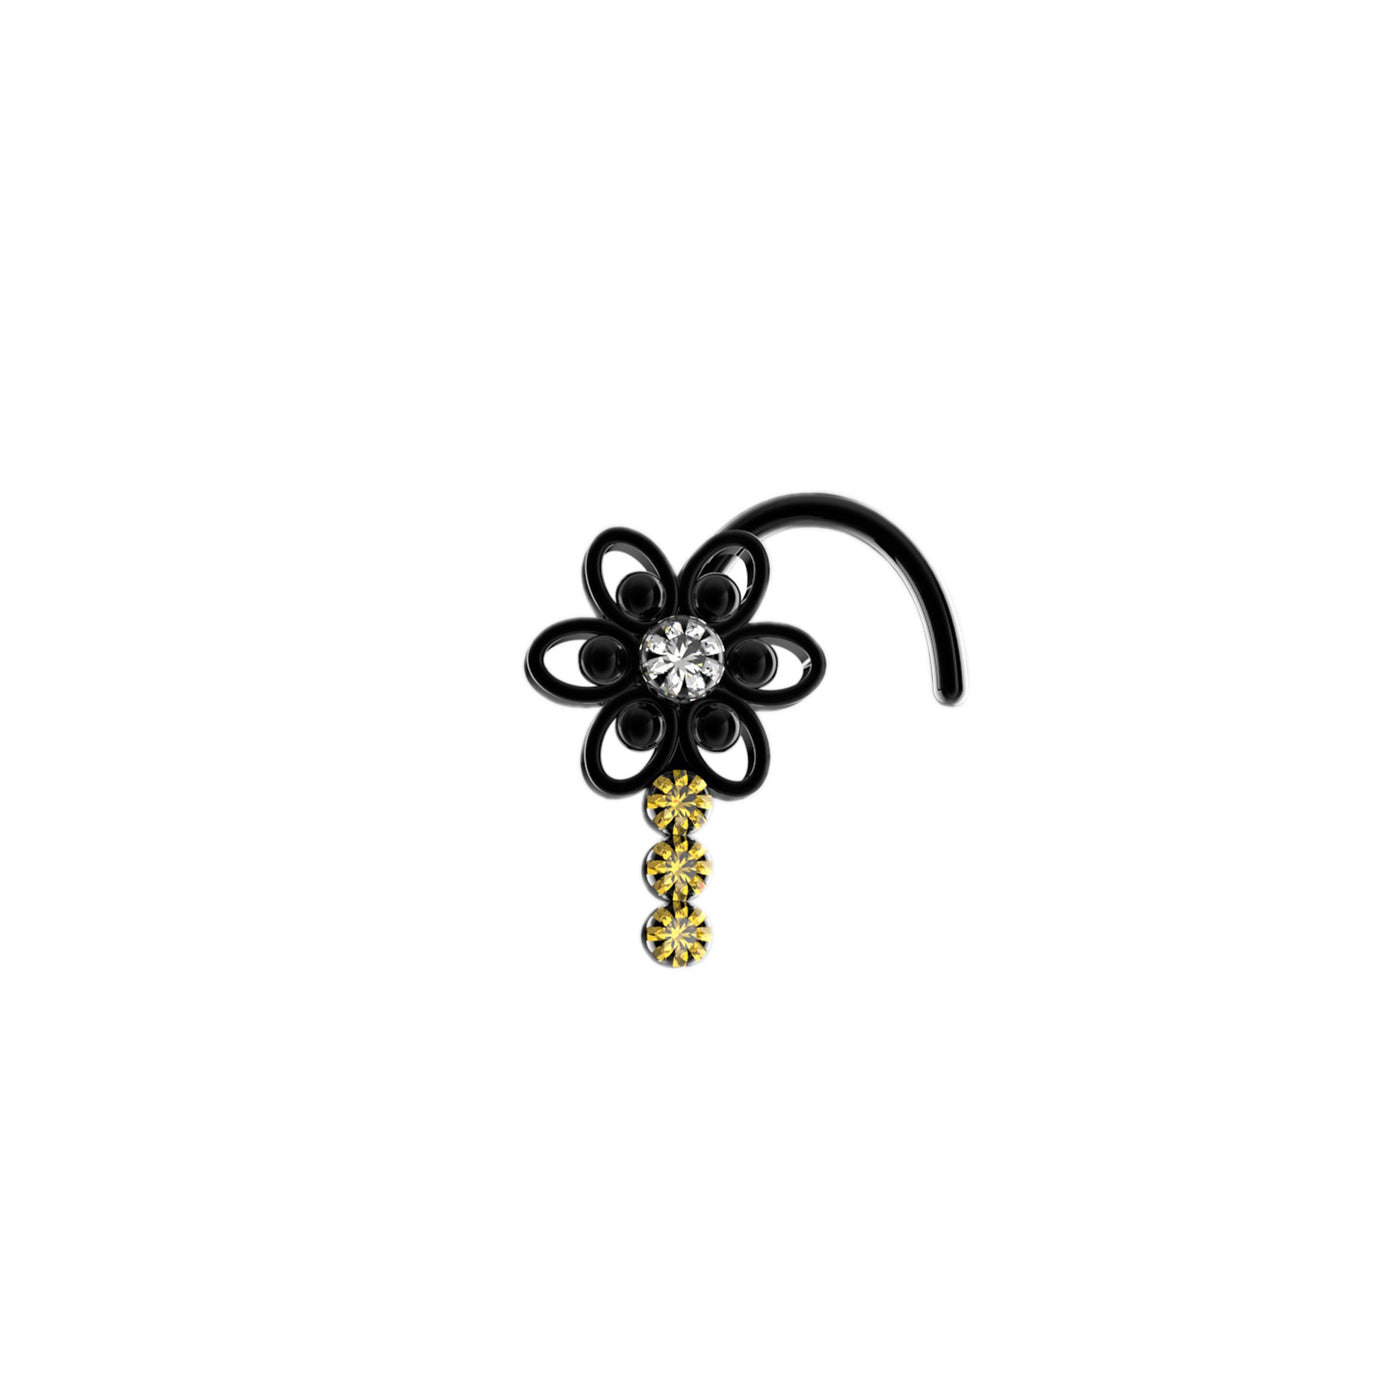 Small Flower With 3 Stone Prong Nose Stud